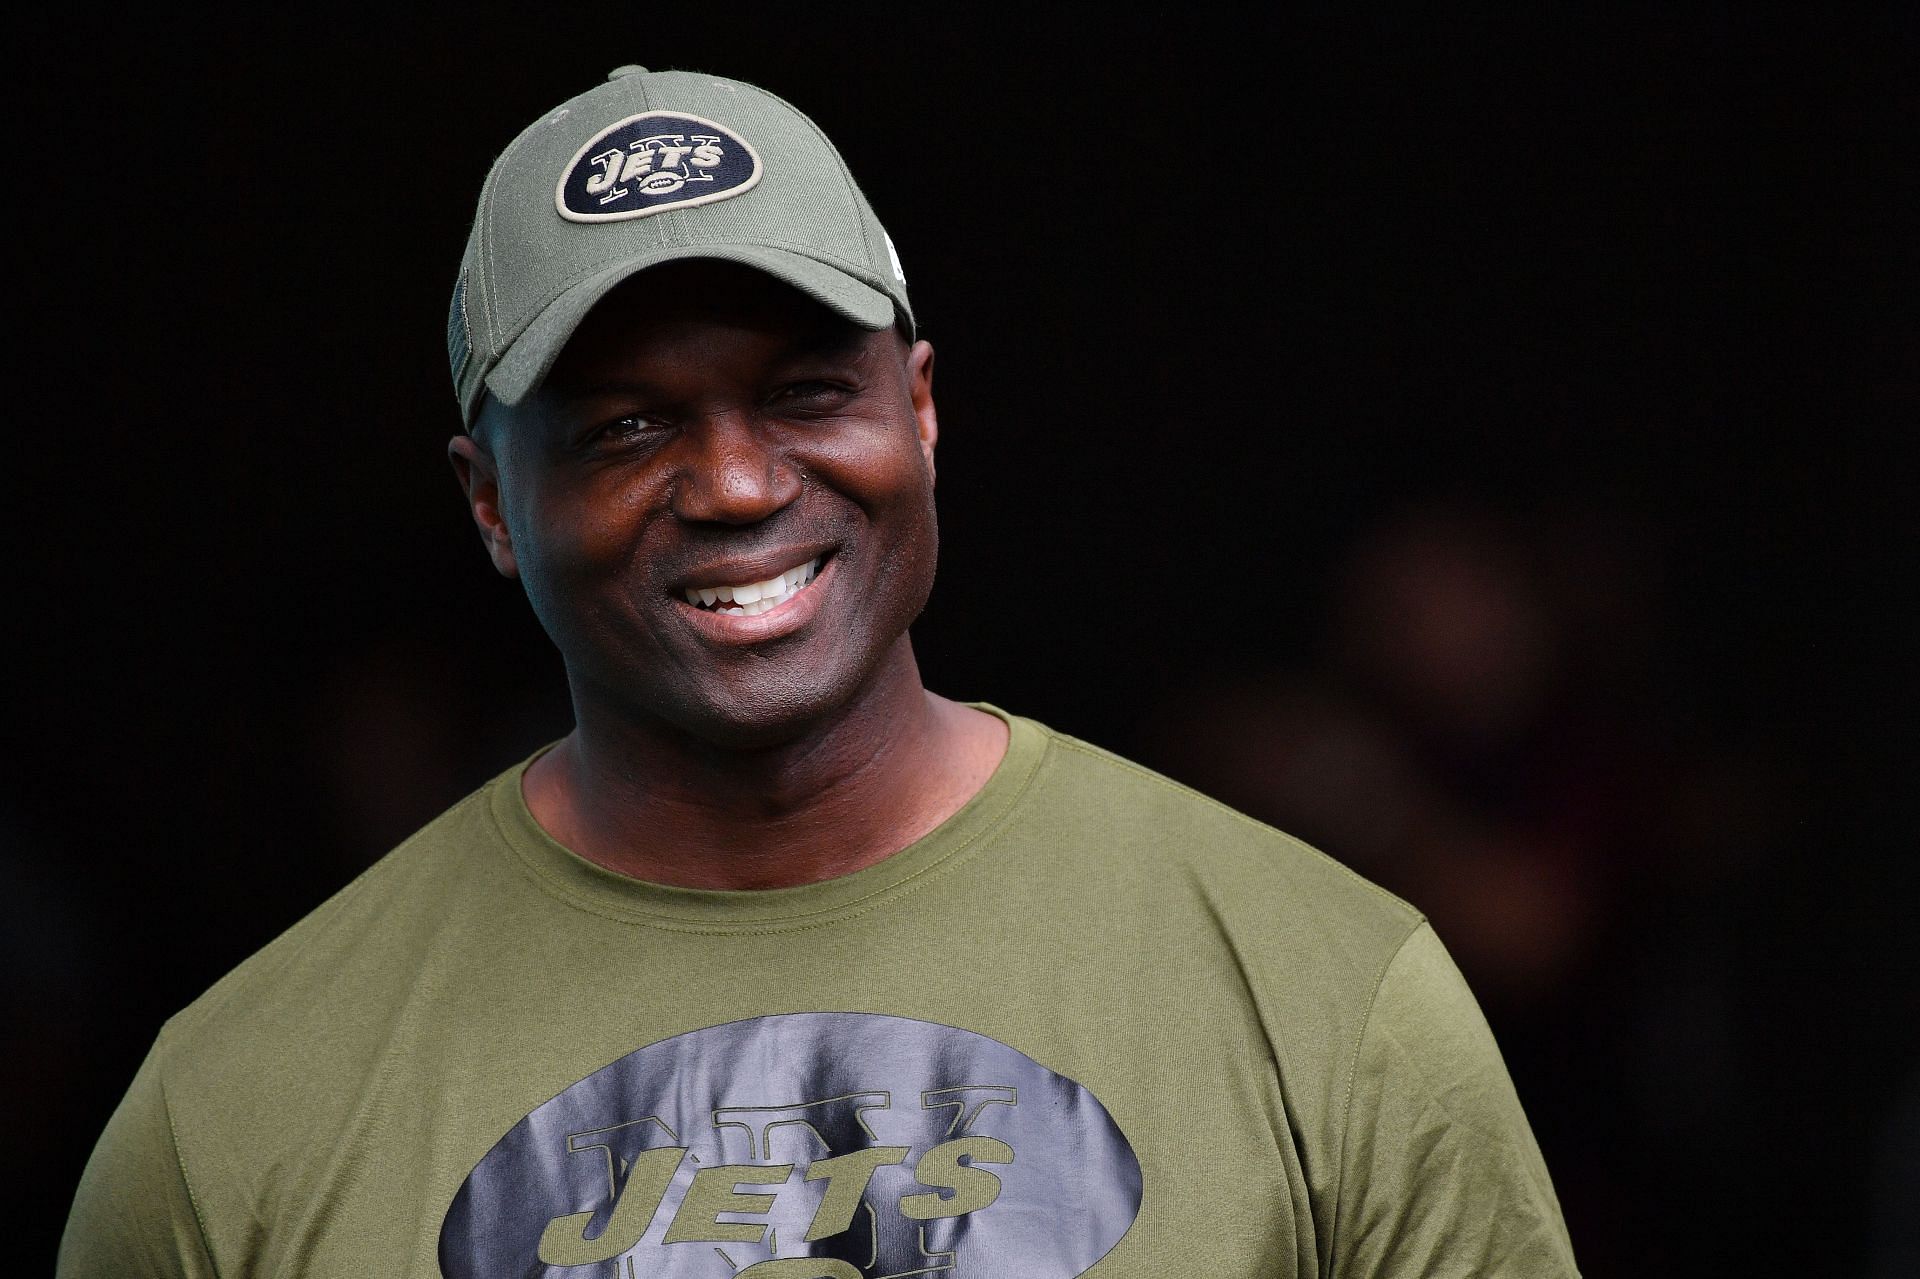 Todd Bowles pictured ahead of a game between the New York Jets and Miami Dolphins.